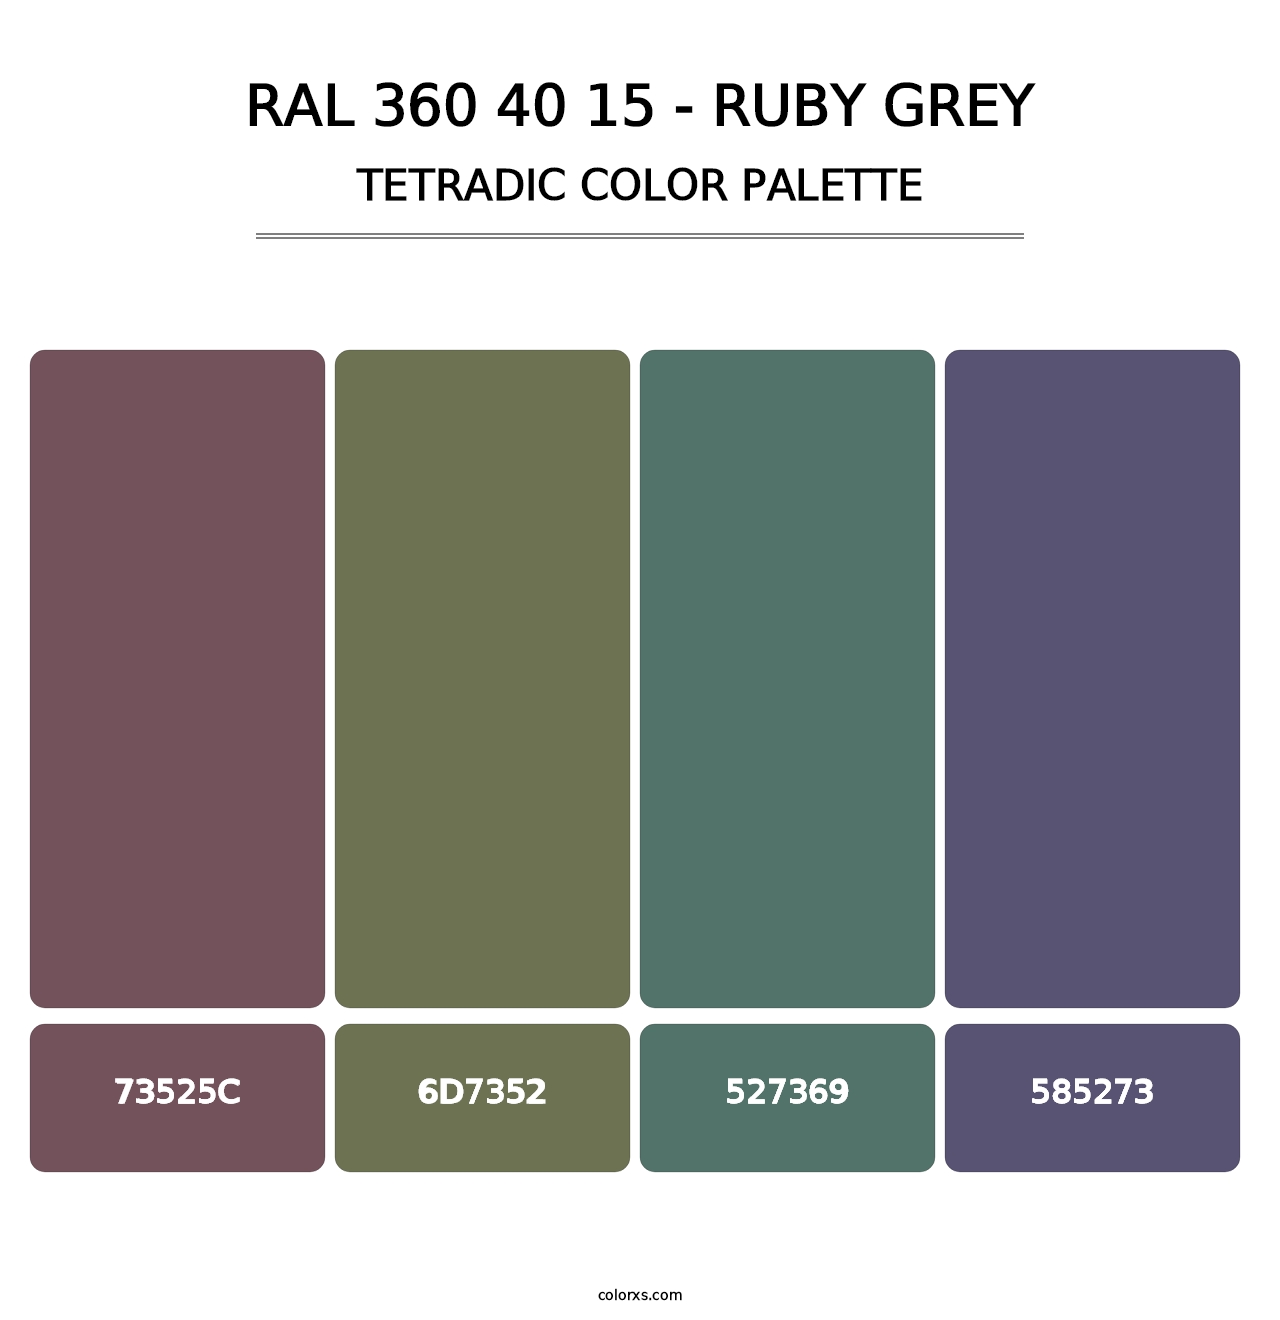 RAL 360 40 15 - Ruby Grey - Tetradic Color Palette